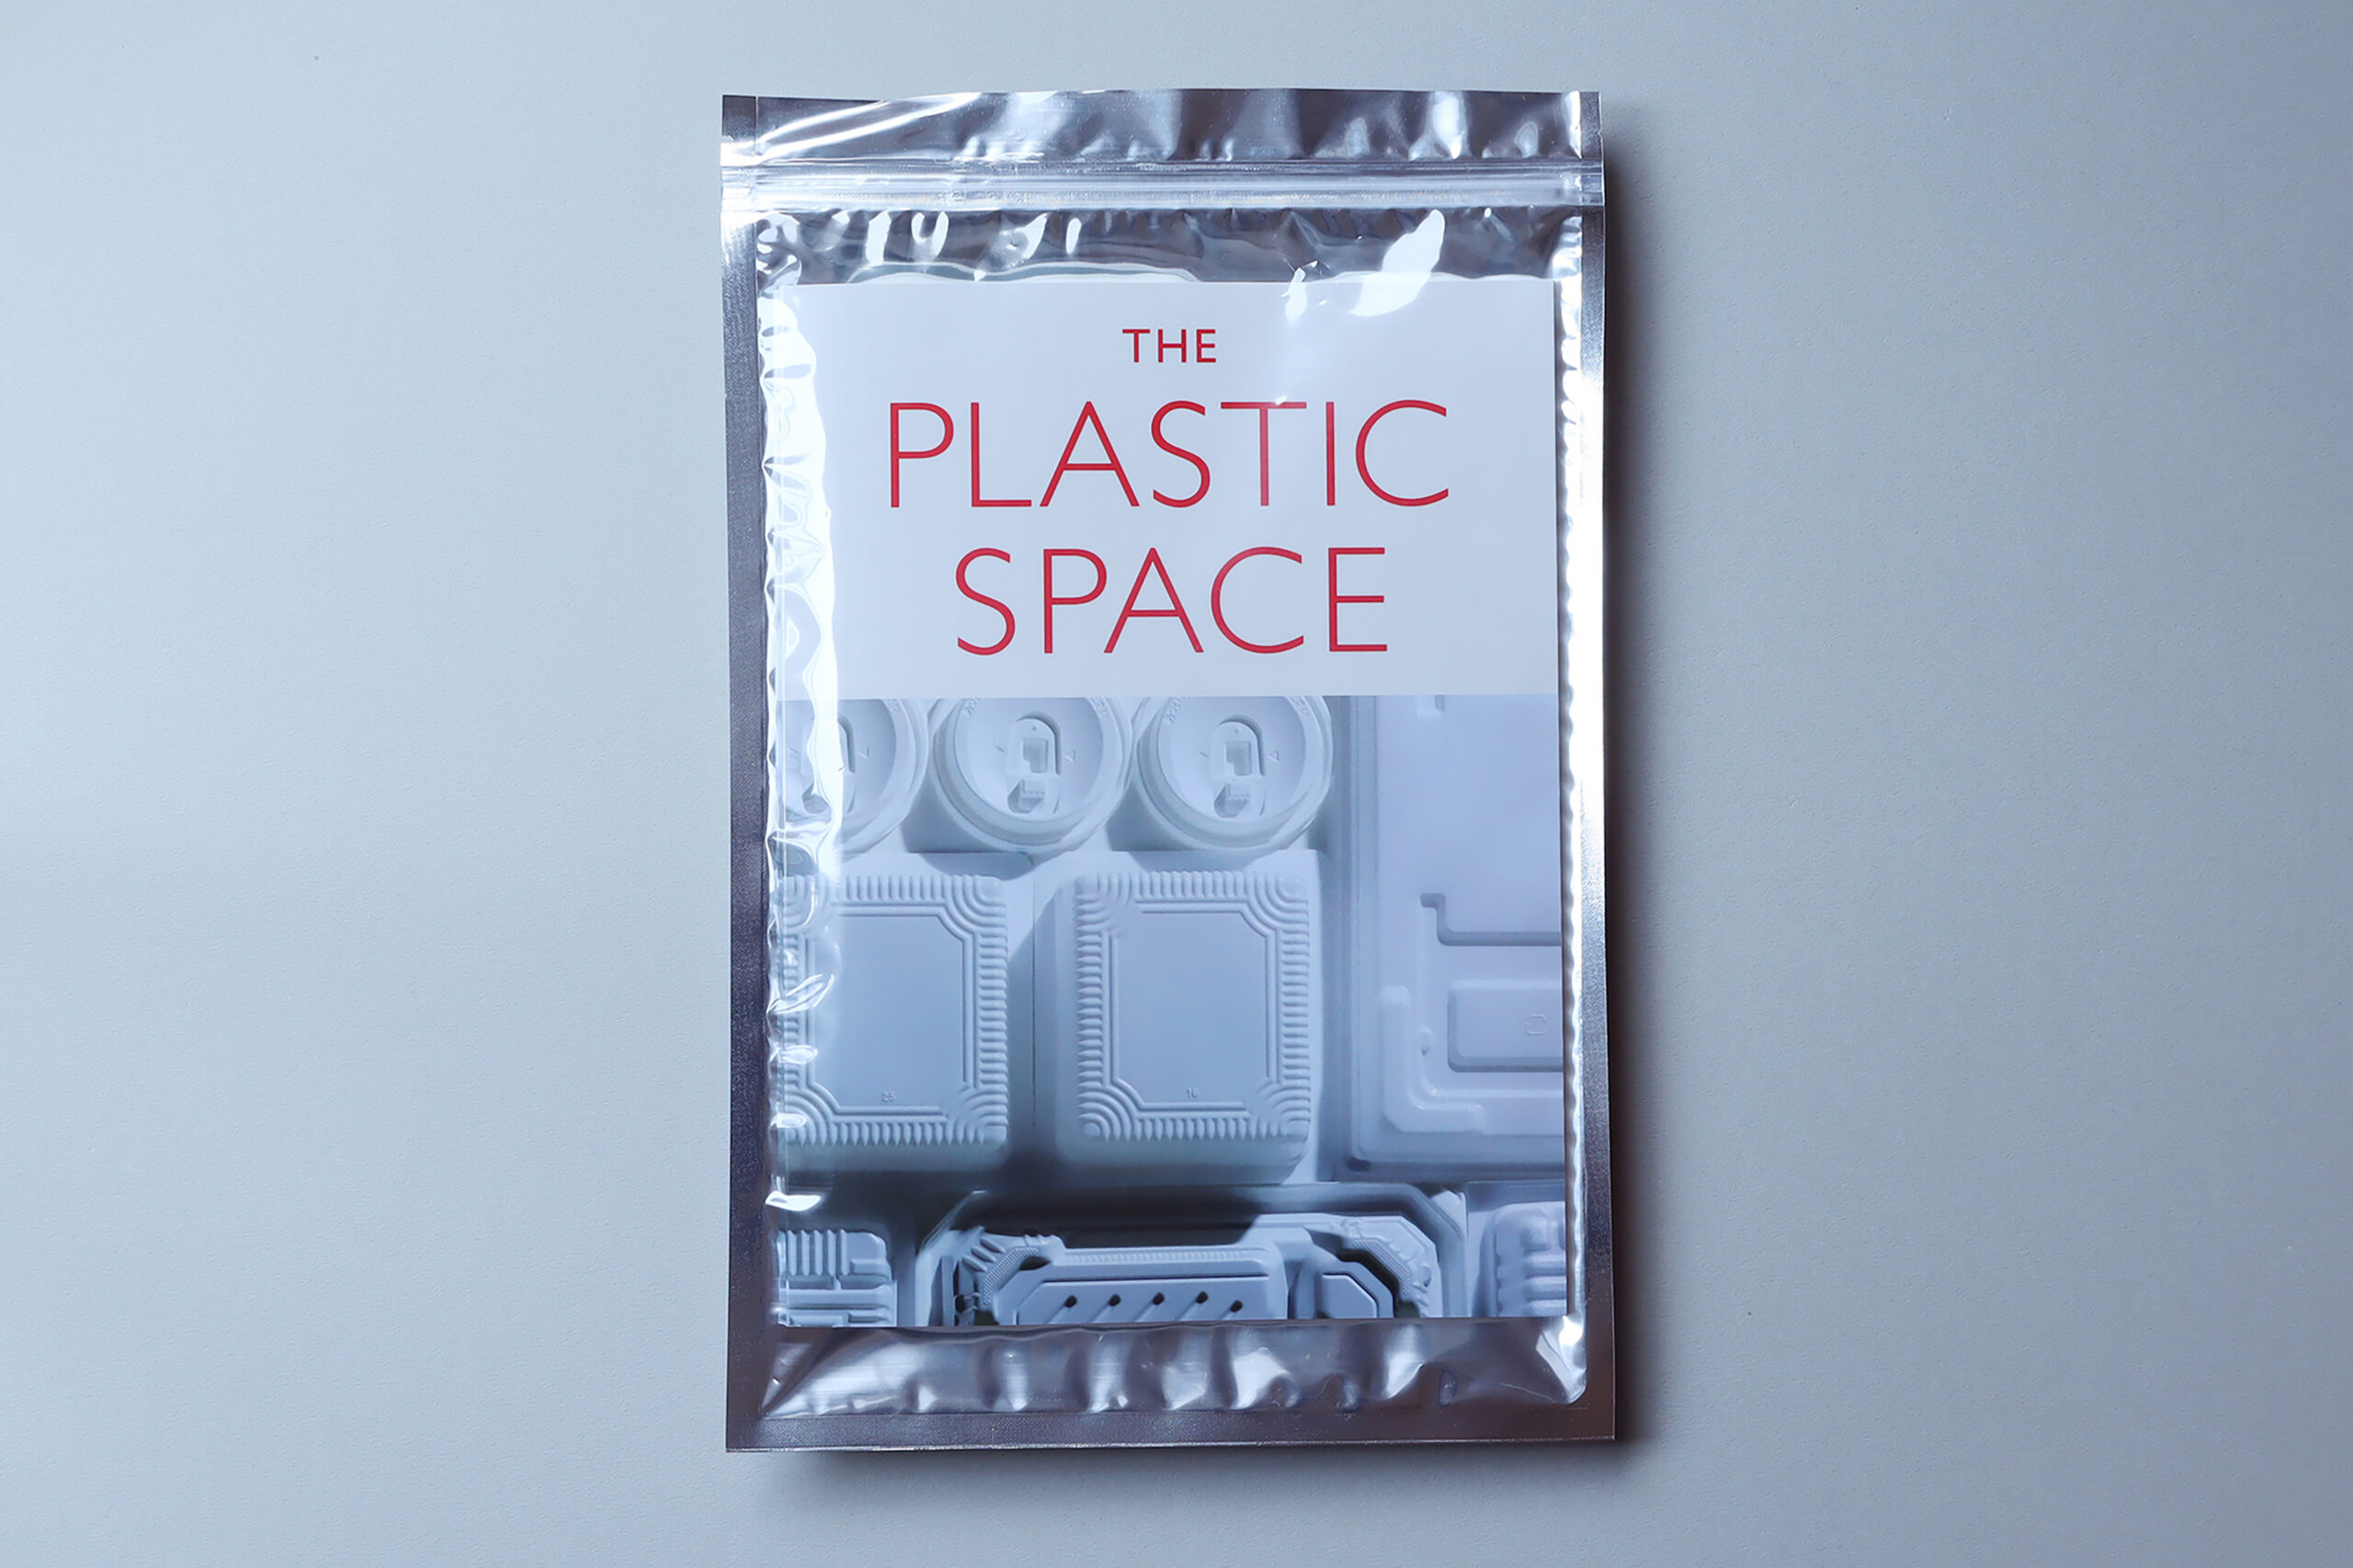 THE PLASTIC SPACE